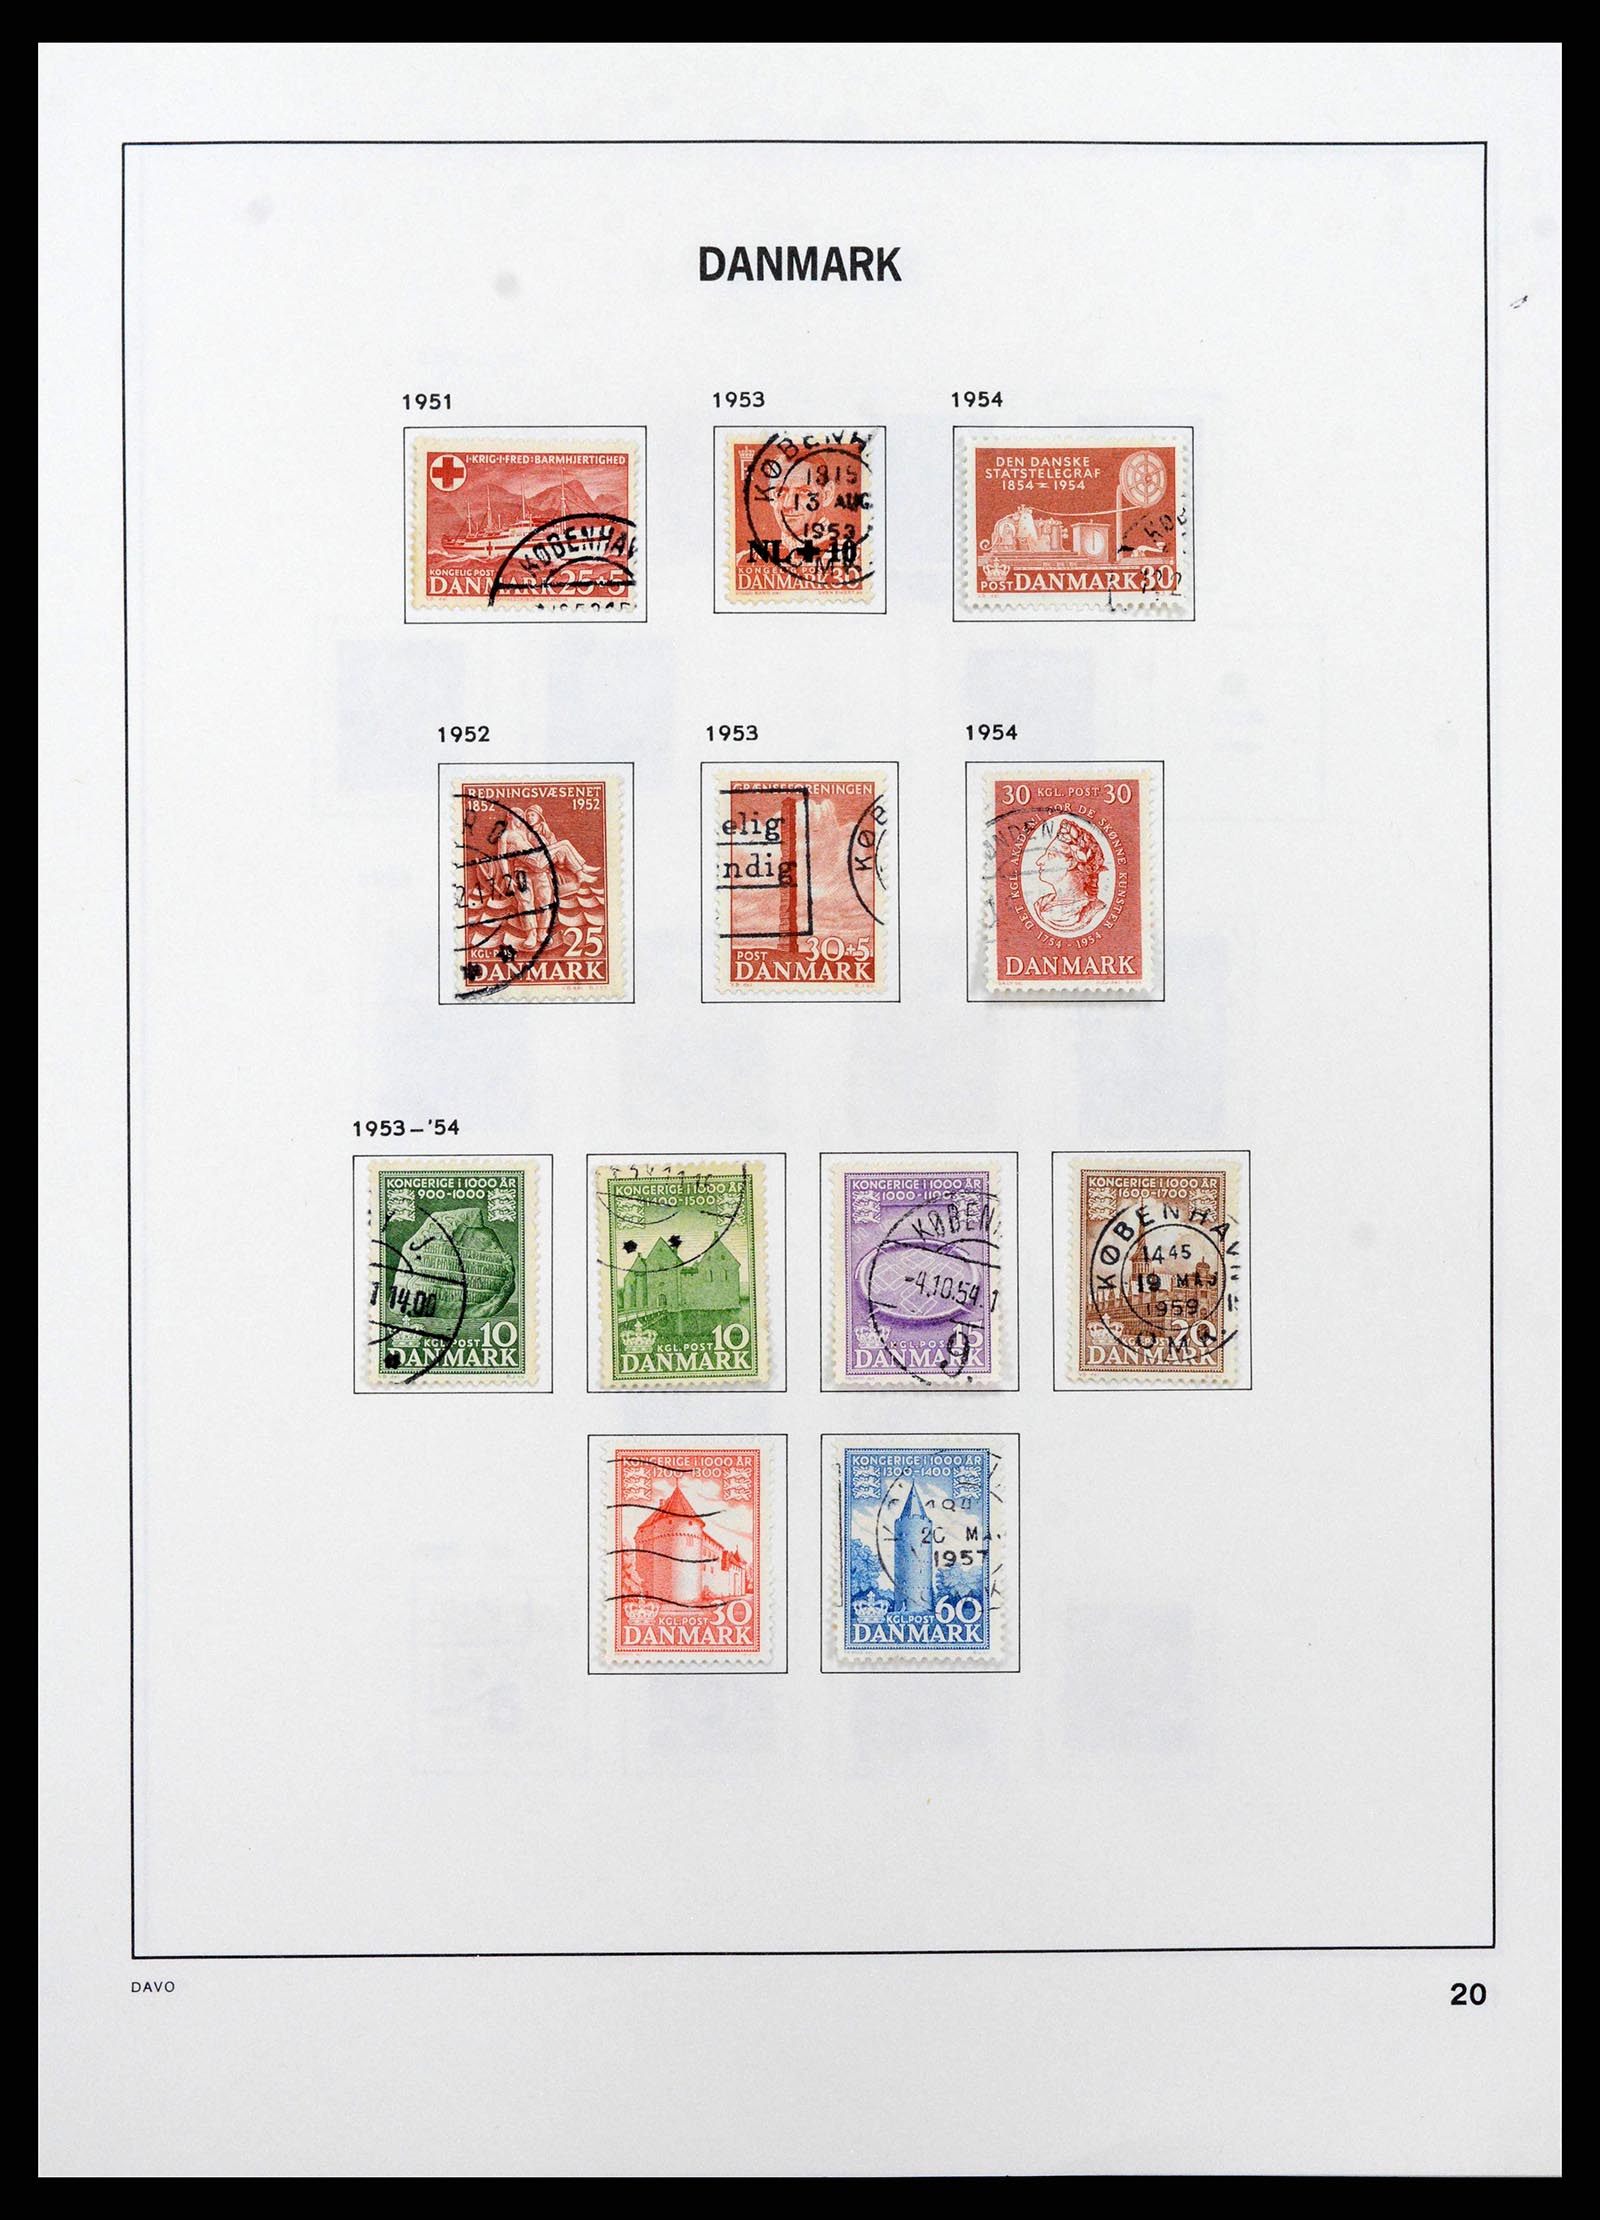 38719 0023 - Stamp collection 38719 Denmark 1851-2002.